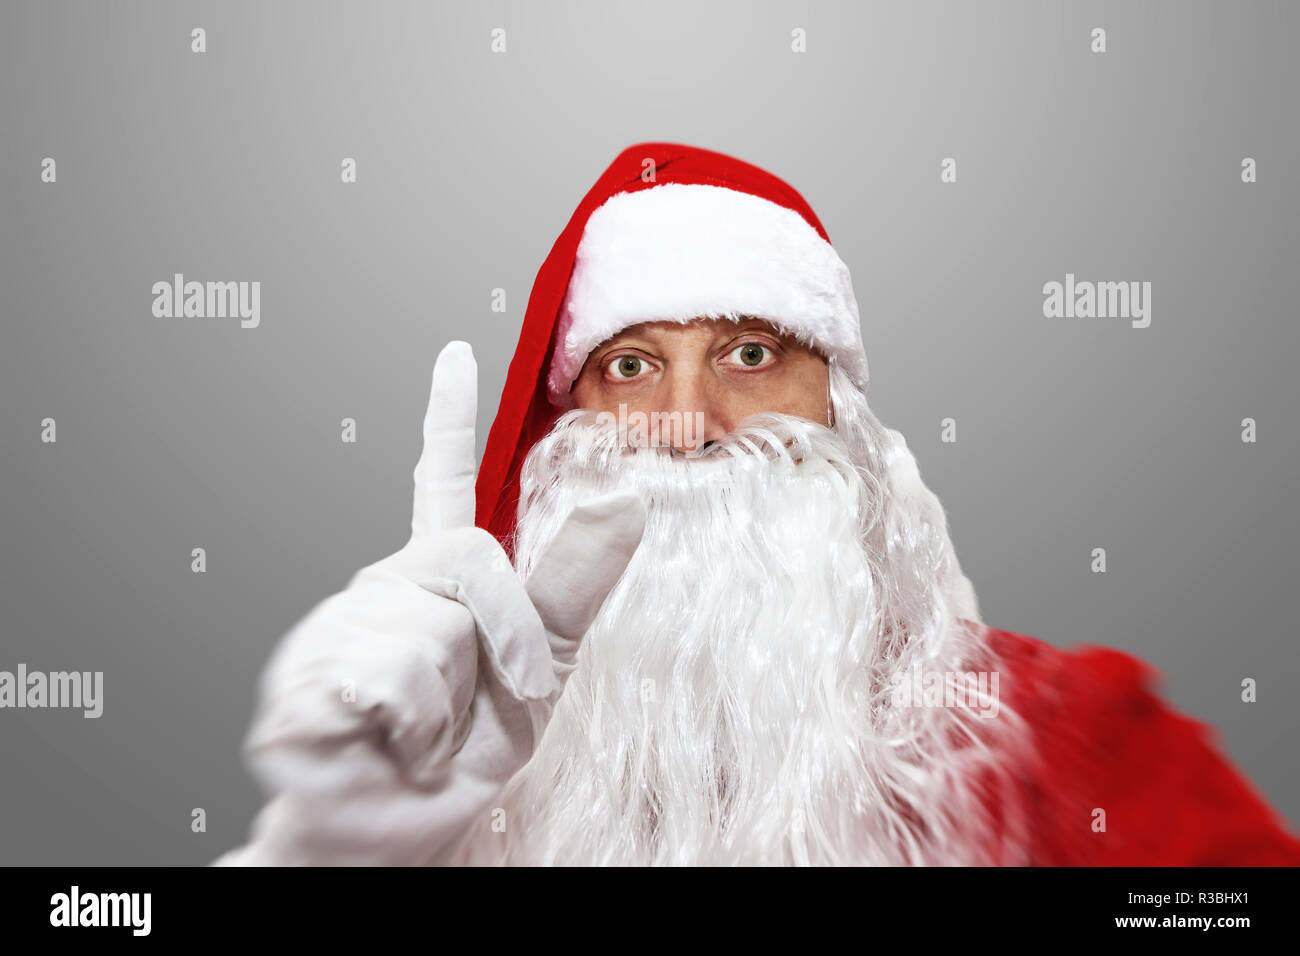 Santa Claus with raised forefinger Stock Photo